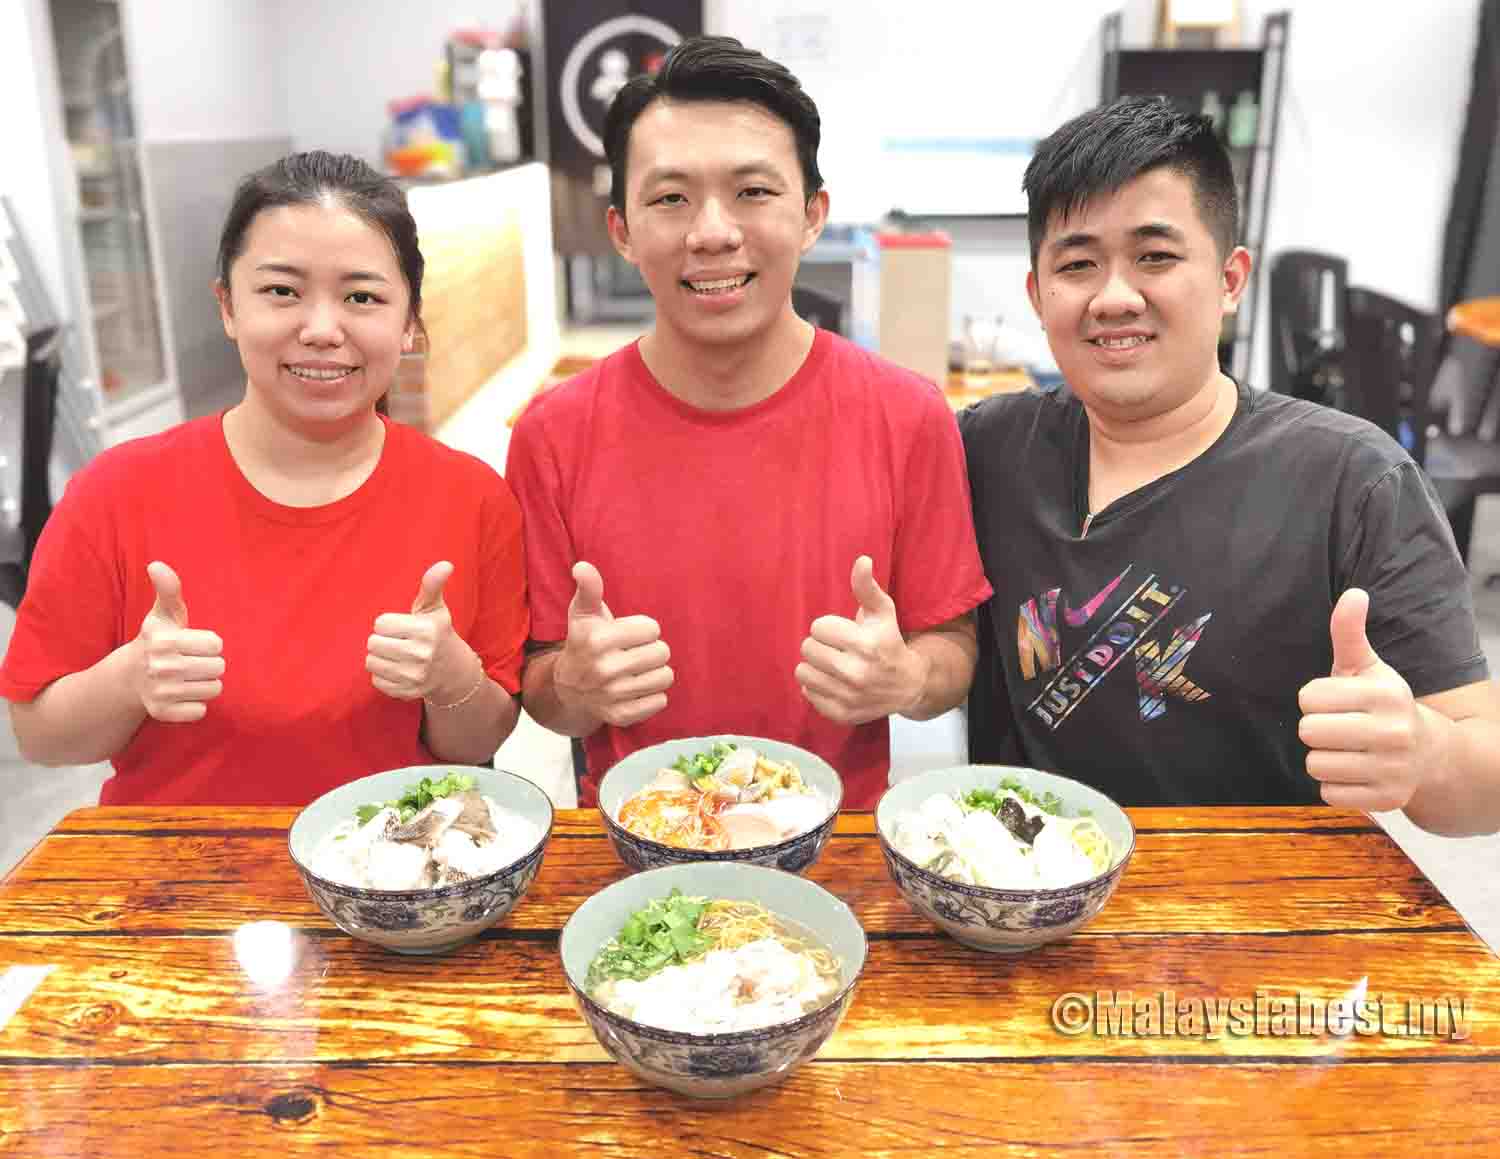 FIND THE RECOGNISED CHINESE CUISINE “MELLOW NOODLE HOUSE” RUNNING IN THE KUALA LUMPUR